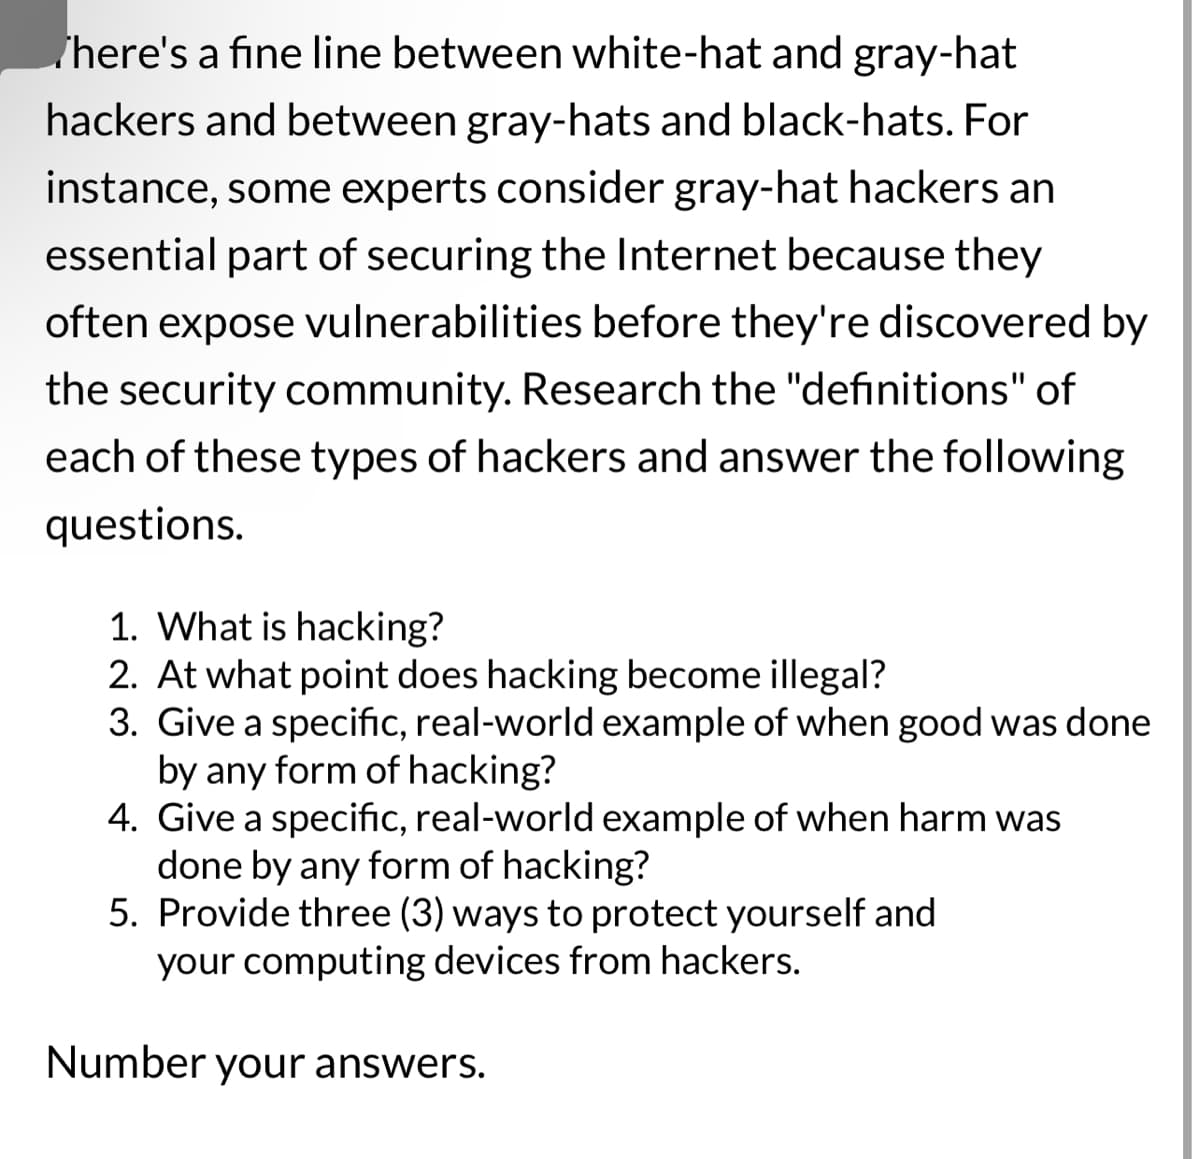 There's a fine line between white-hat and gray-hat
hackers and between gray-hats and black-hats. For
instance, some experts consider gray-hat hackers an
essential part of securing the Internet because they
often expose vulnerabilities before they're discovered by
the security community. Research the "definitions" of
each of these types of hackers and answer the following
questions.
1. What is hacking?
2. At what point does hacking become illegal?
3. Give a specific, real-world example of when good was done
by any form of hacking?
4. Give a specific, real-world example of when harm was
done by any form of hacking?
5. Provide three (3) ways to protect yourself and
your computing devices from hackers.
Number your answers.